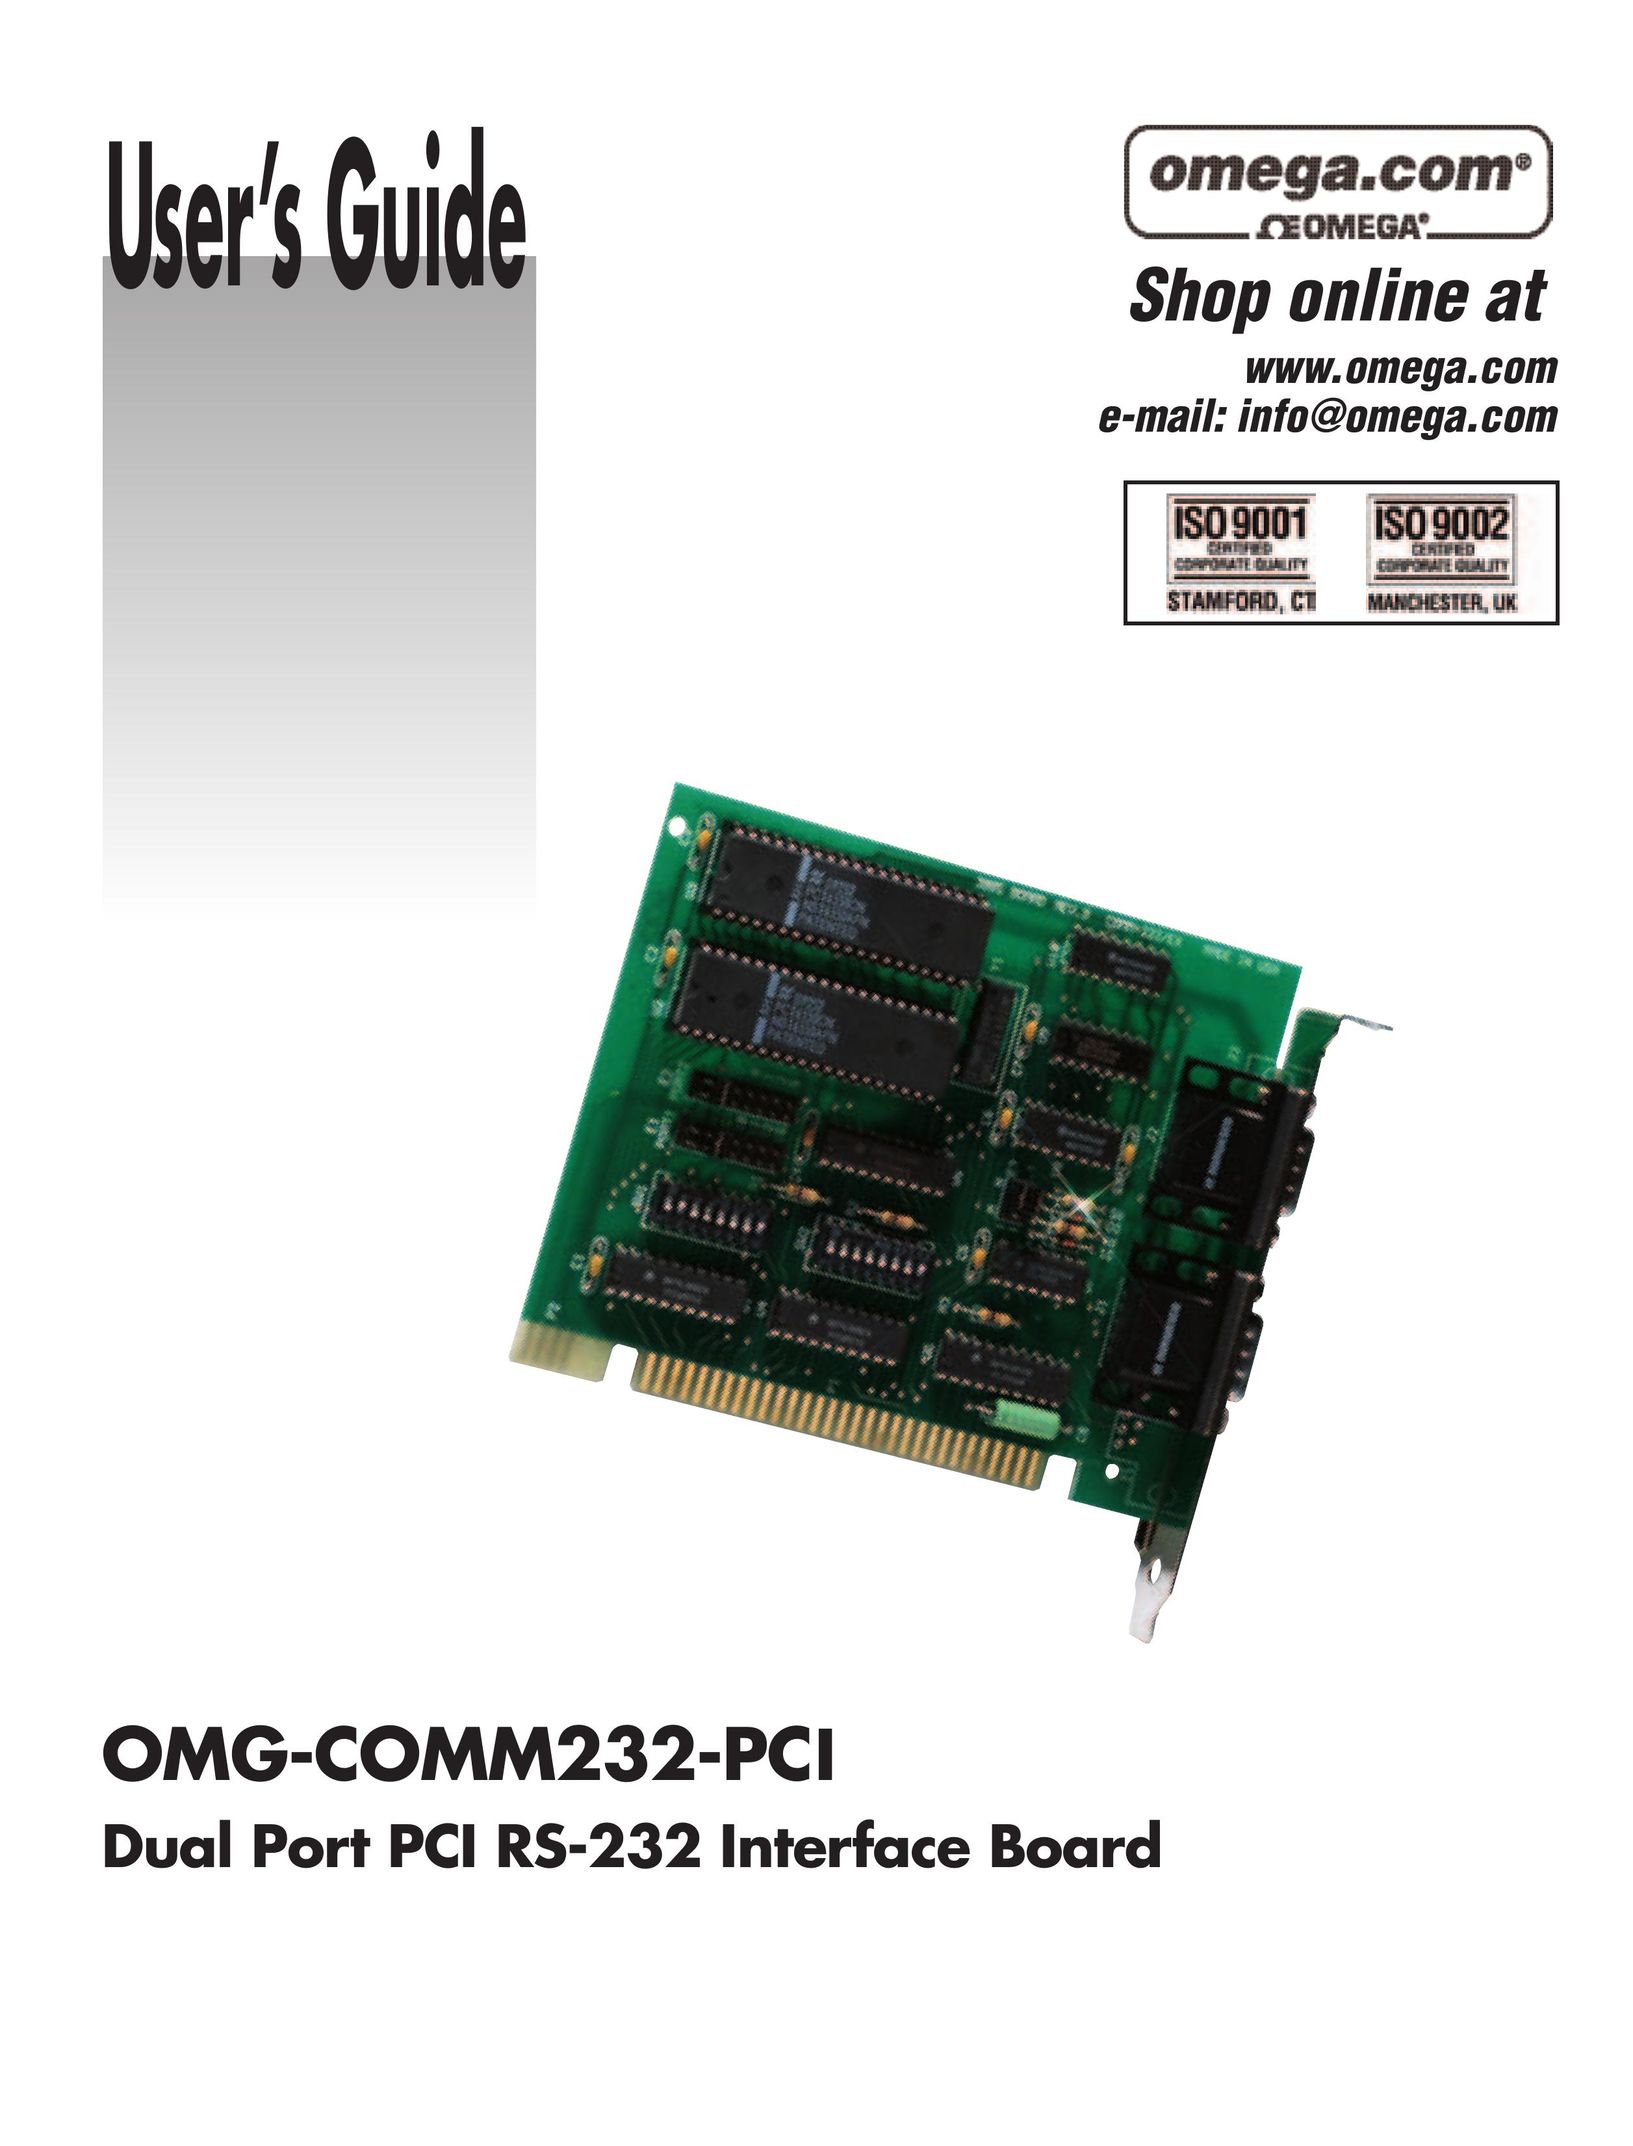 Omega Vehicle Security OMG-COMM232-PCI Network Card User Manual